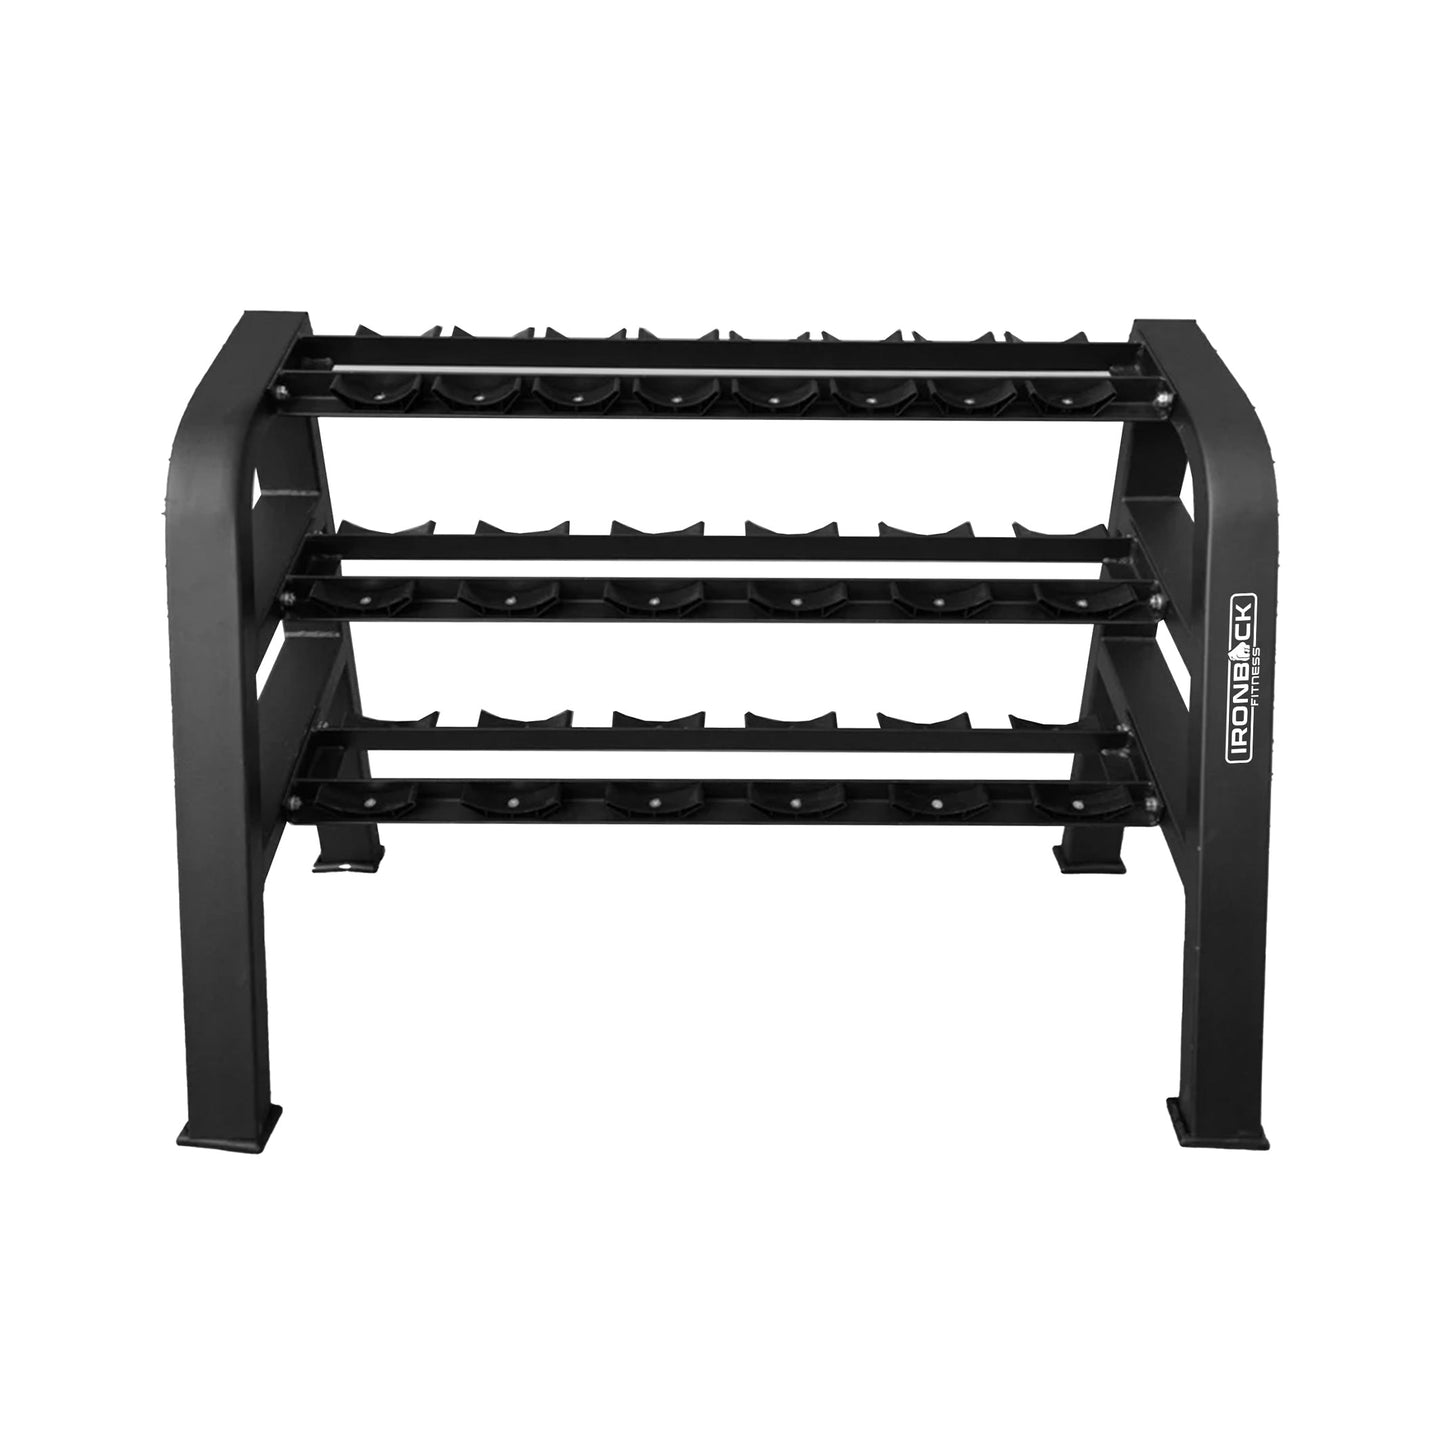 Dumbbell Set with 3 Tier Rack (32.5kg to 50kg Pairs) Ironback